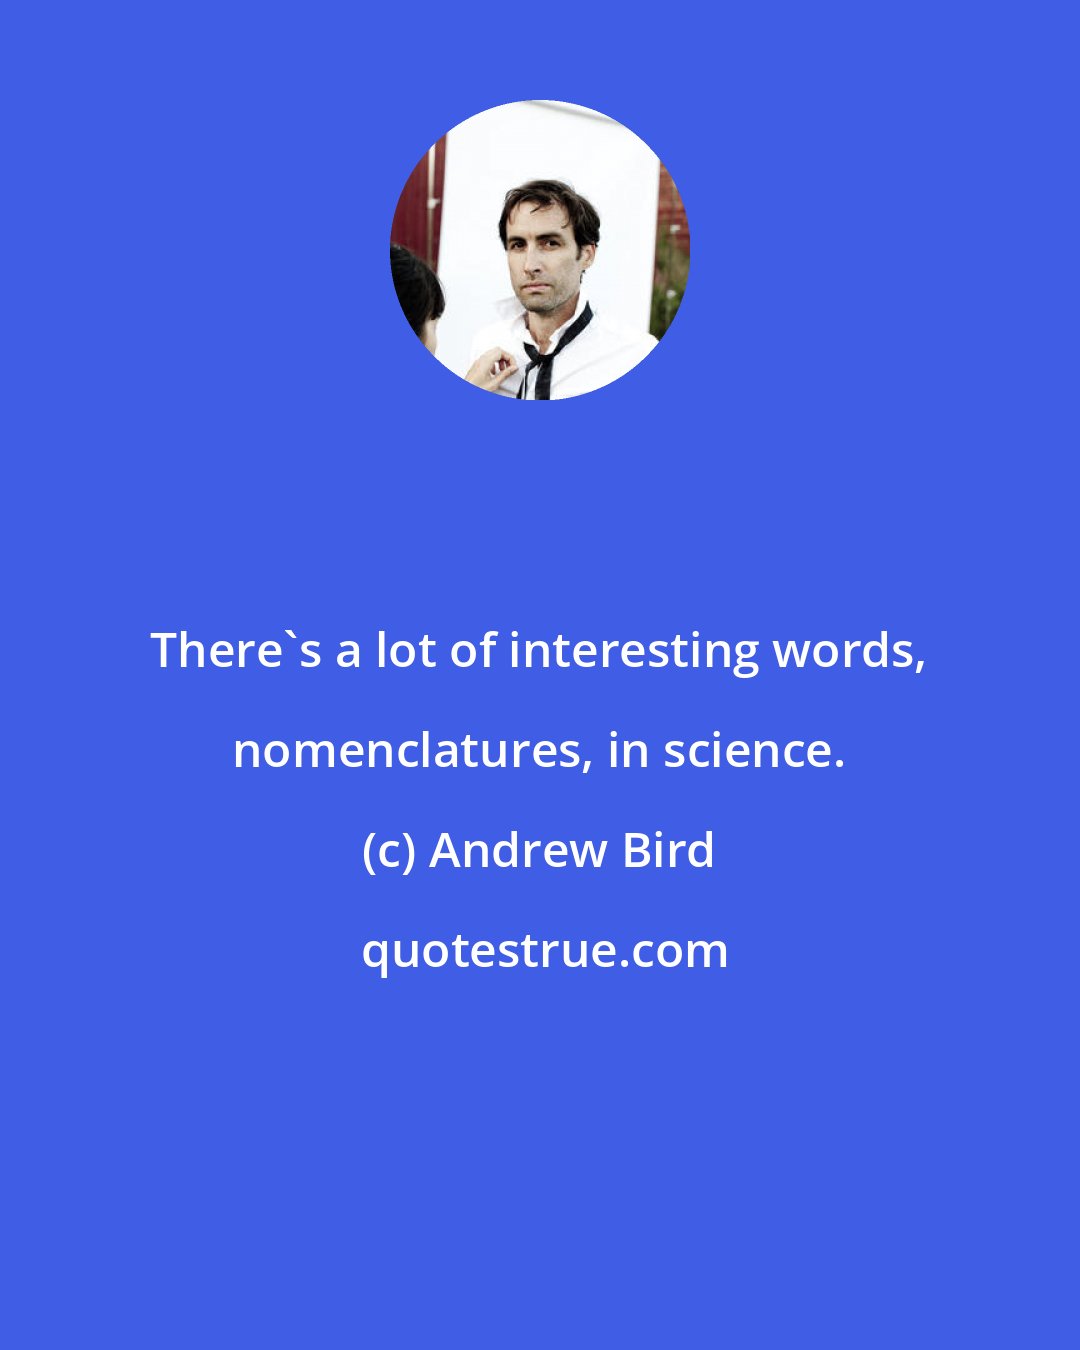 Andrew Bird: There's a lot of interesting words, nomenclatures, in science.